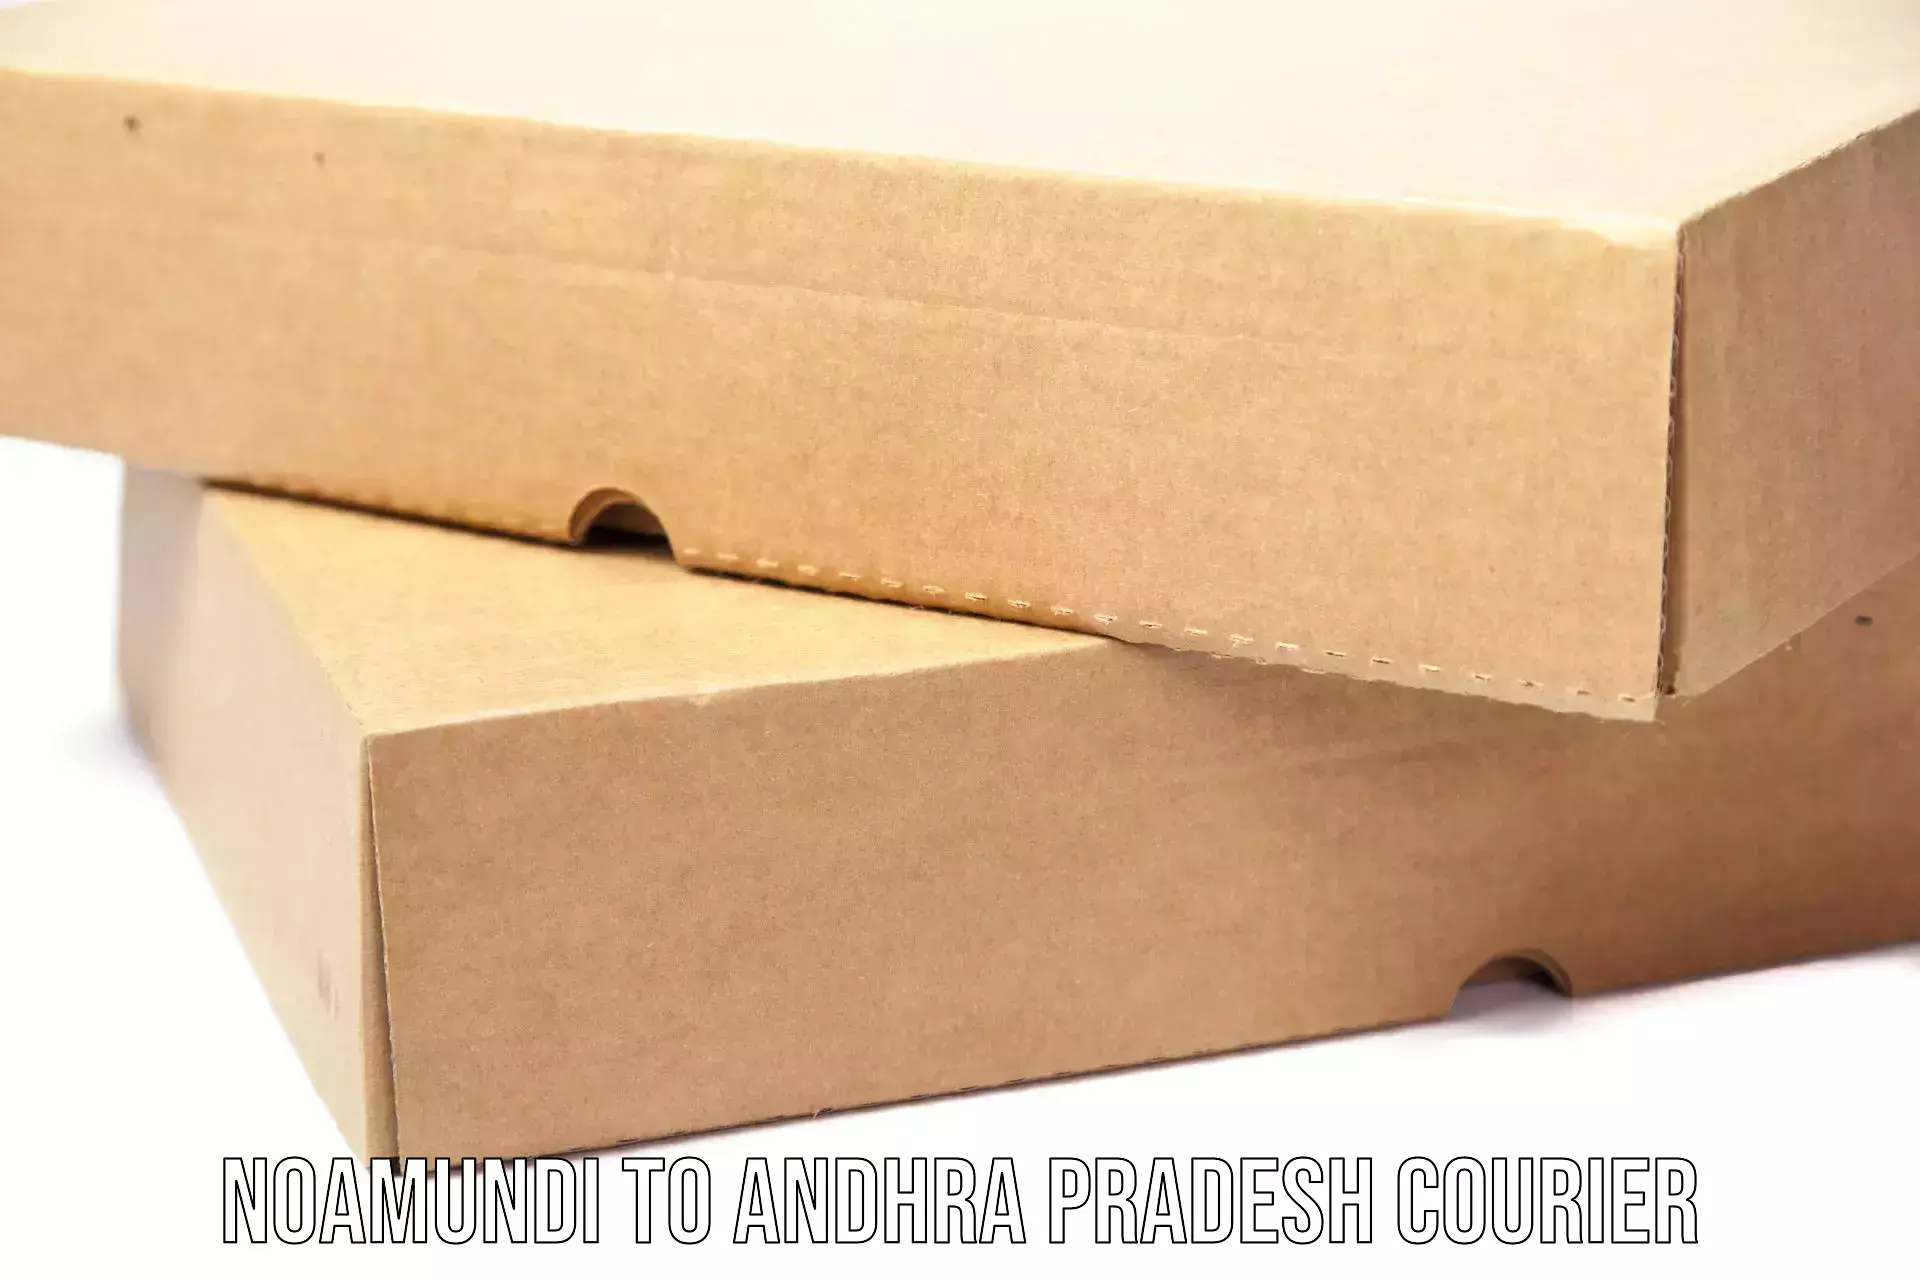 Cost-effective courier options in Noamundi to Andhra Pradesh